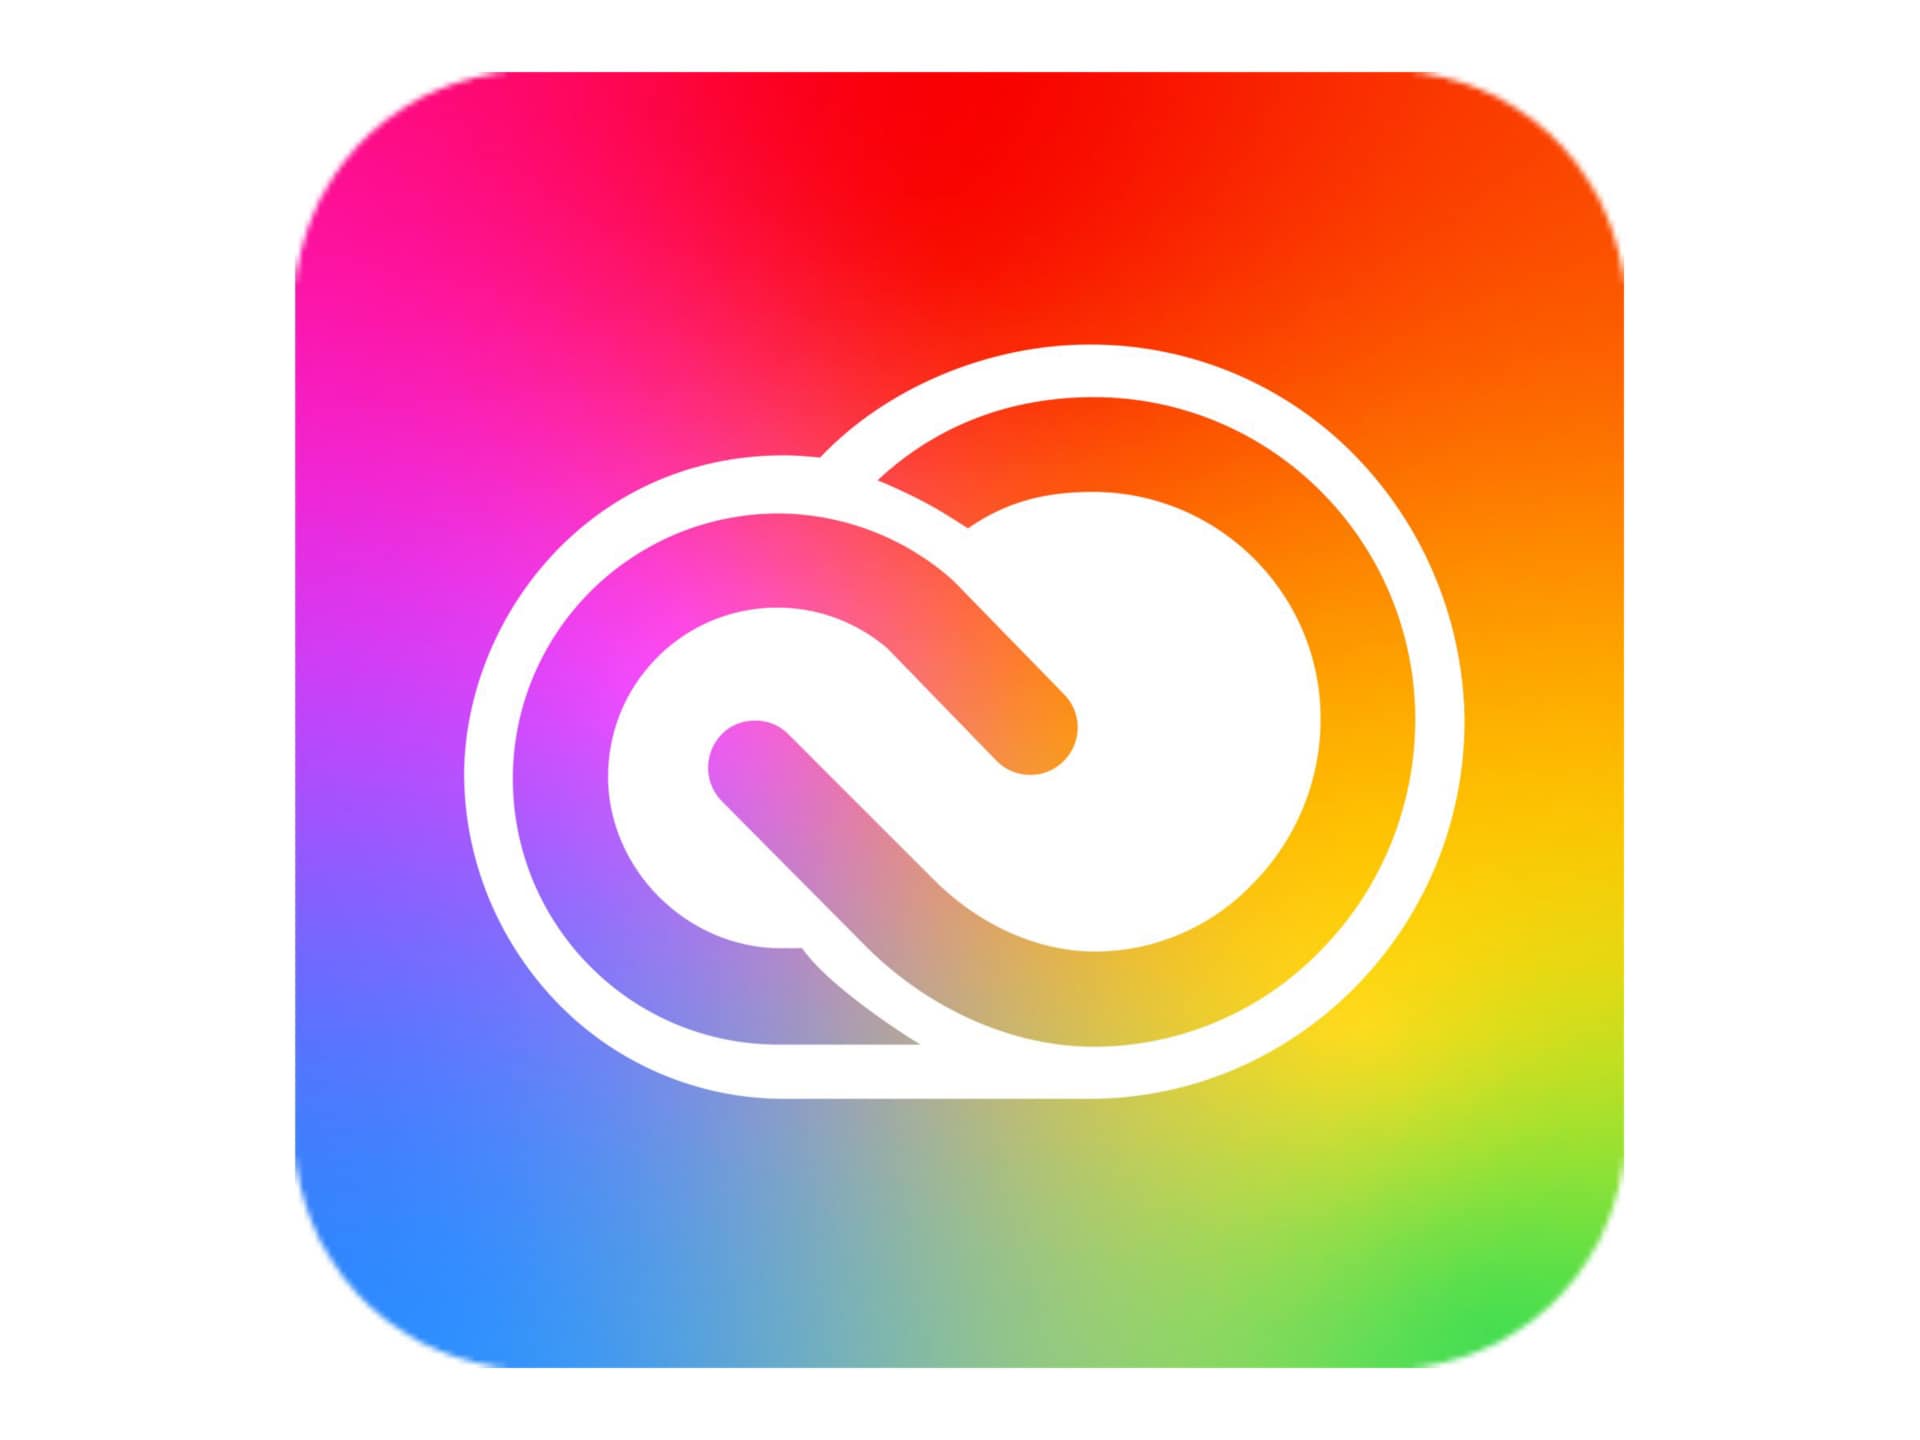 Adobe Creative Cloud for teams - All Apps - Subscription New - 10 assets per month - with Adobe Stock